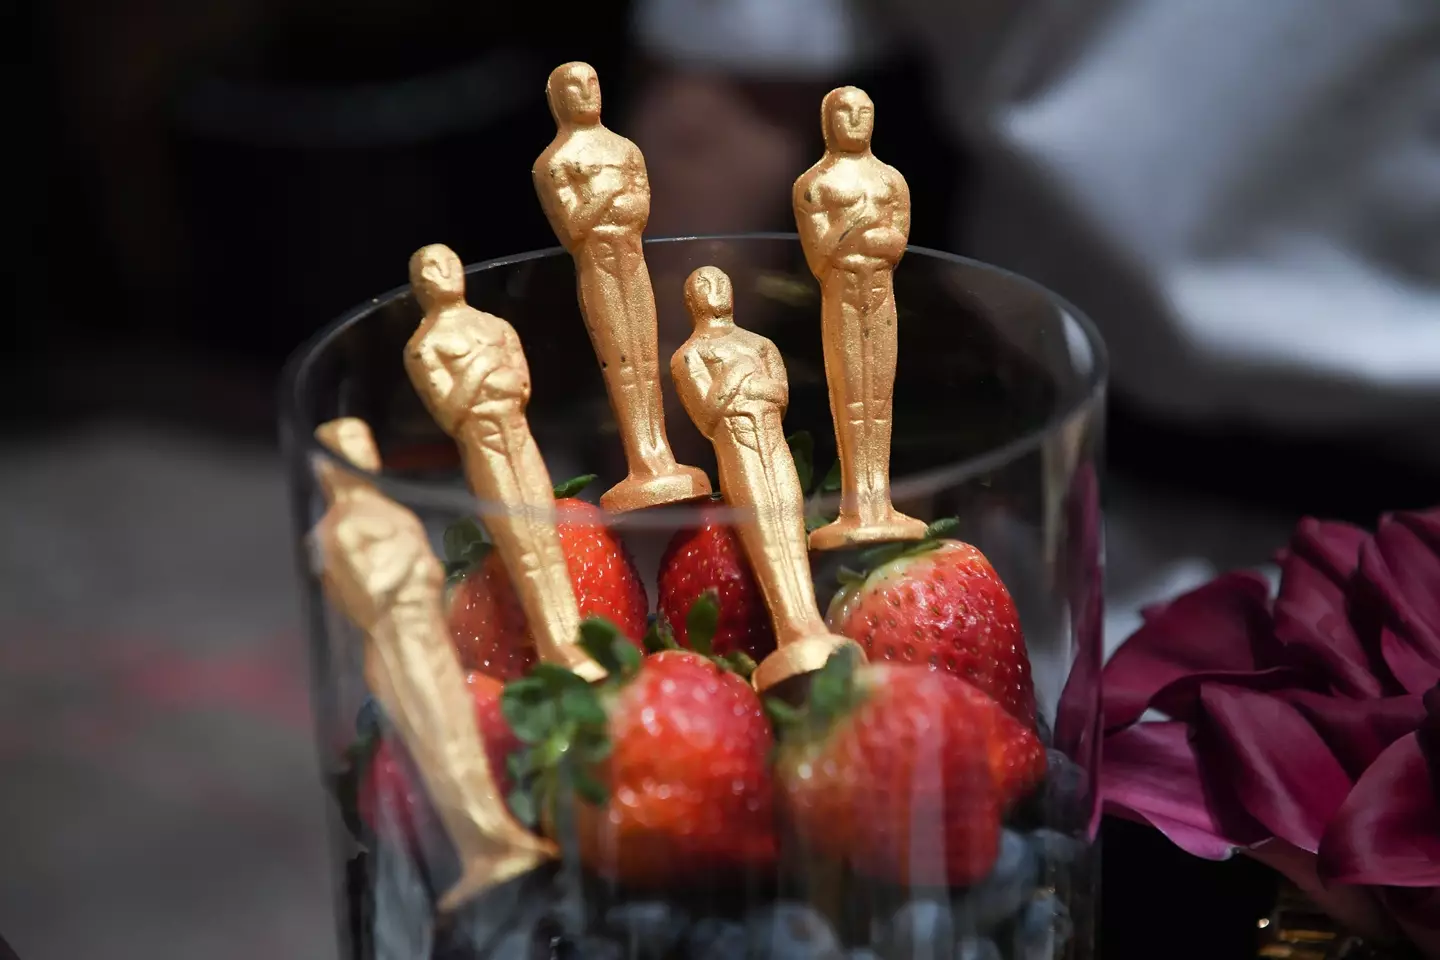 Chocolate Oscars statues and strawberries.